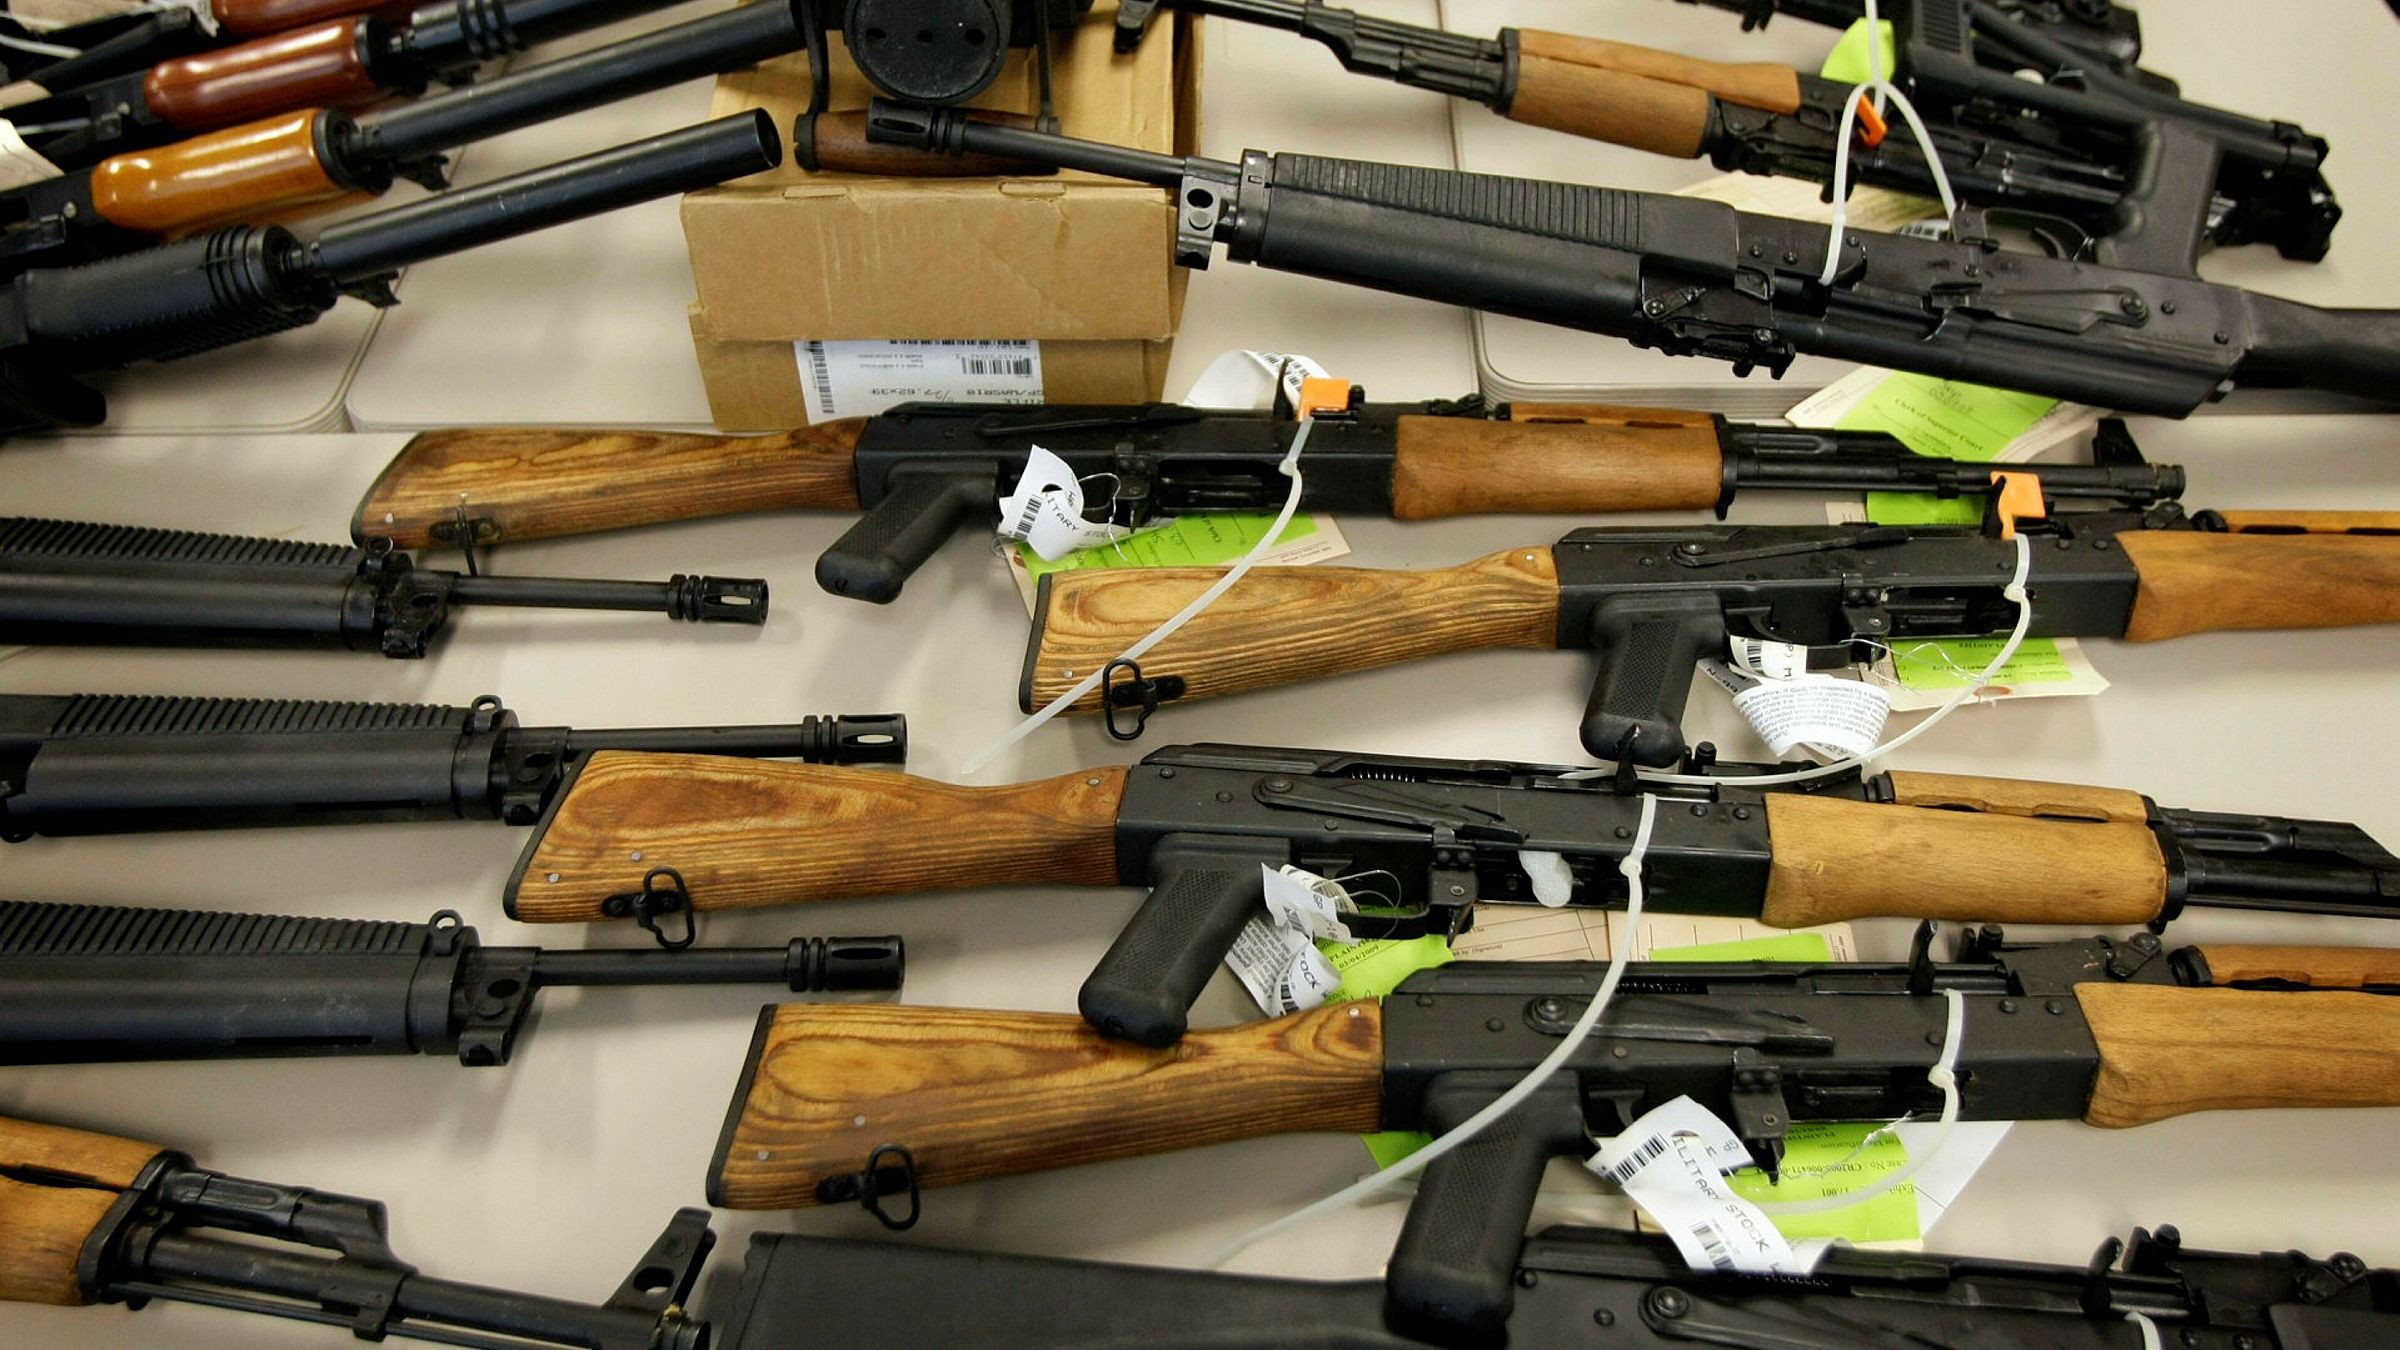 Why are American gun manufacturers being sued?